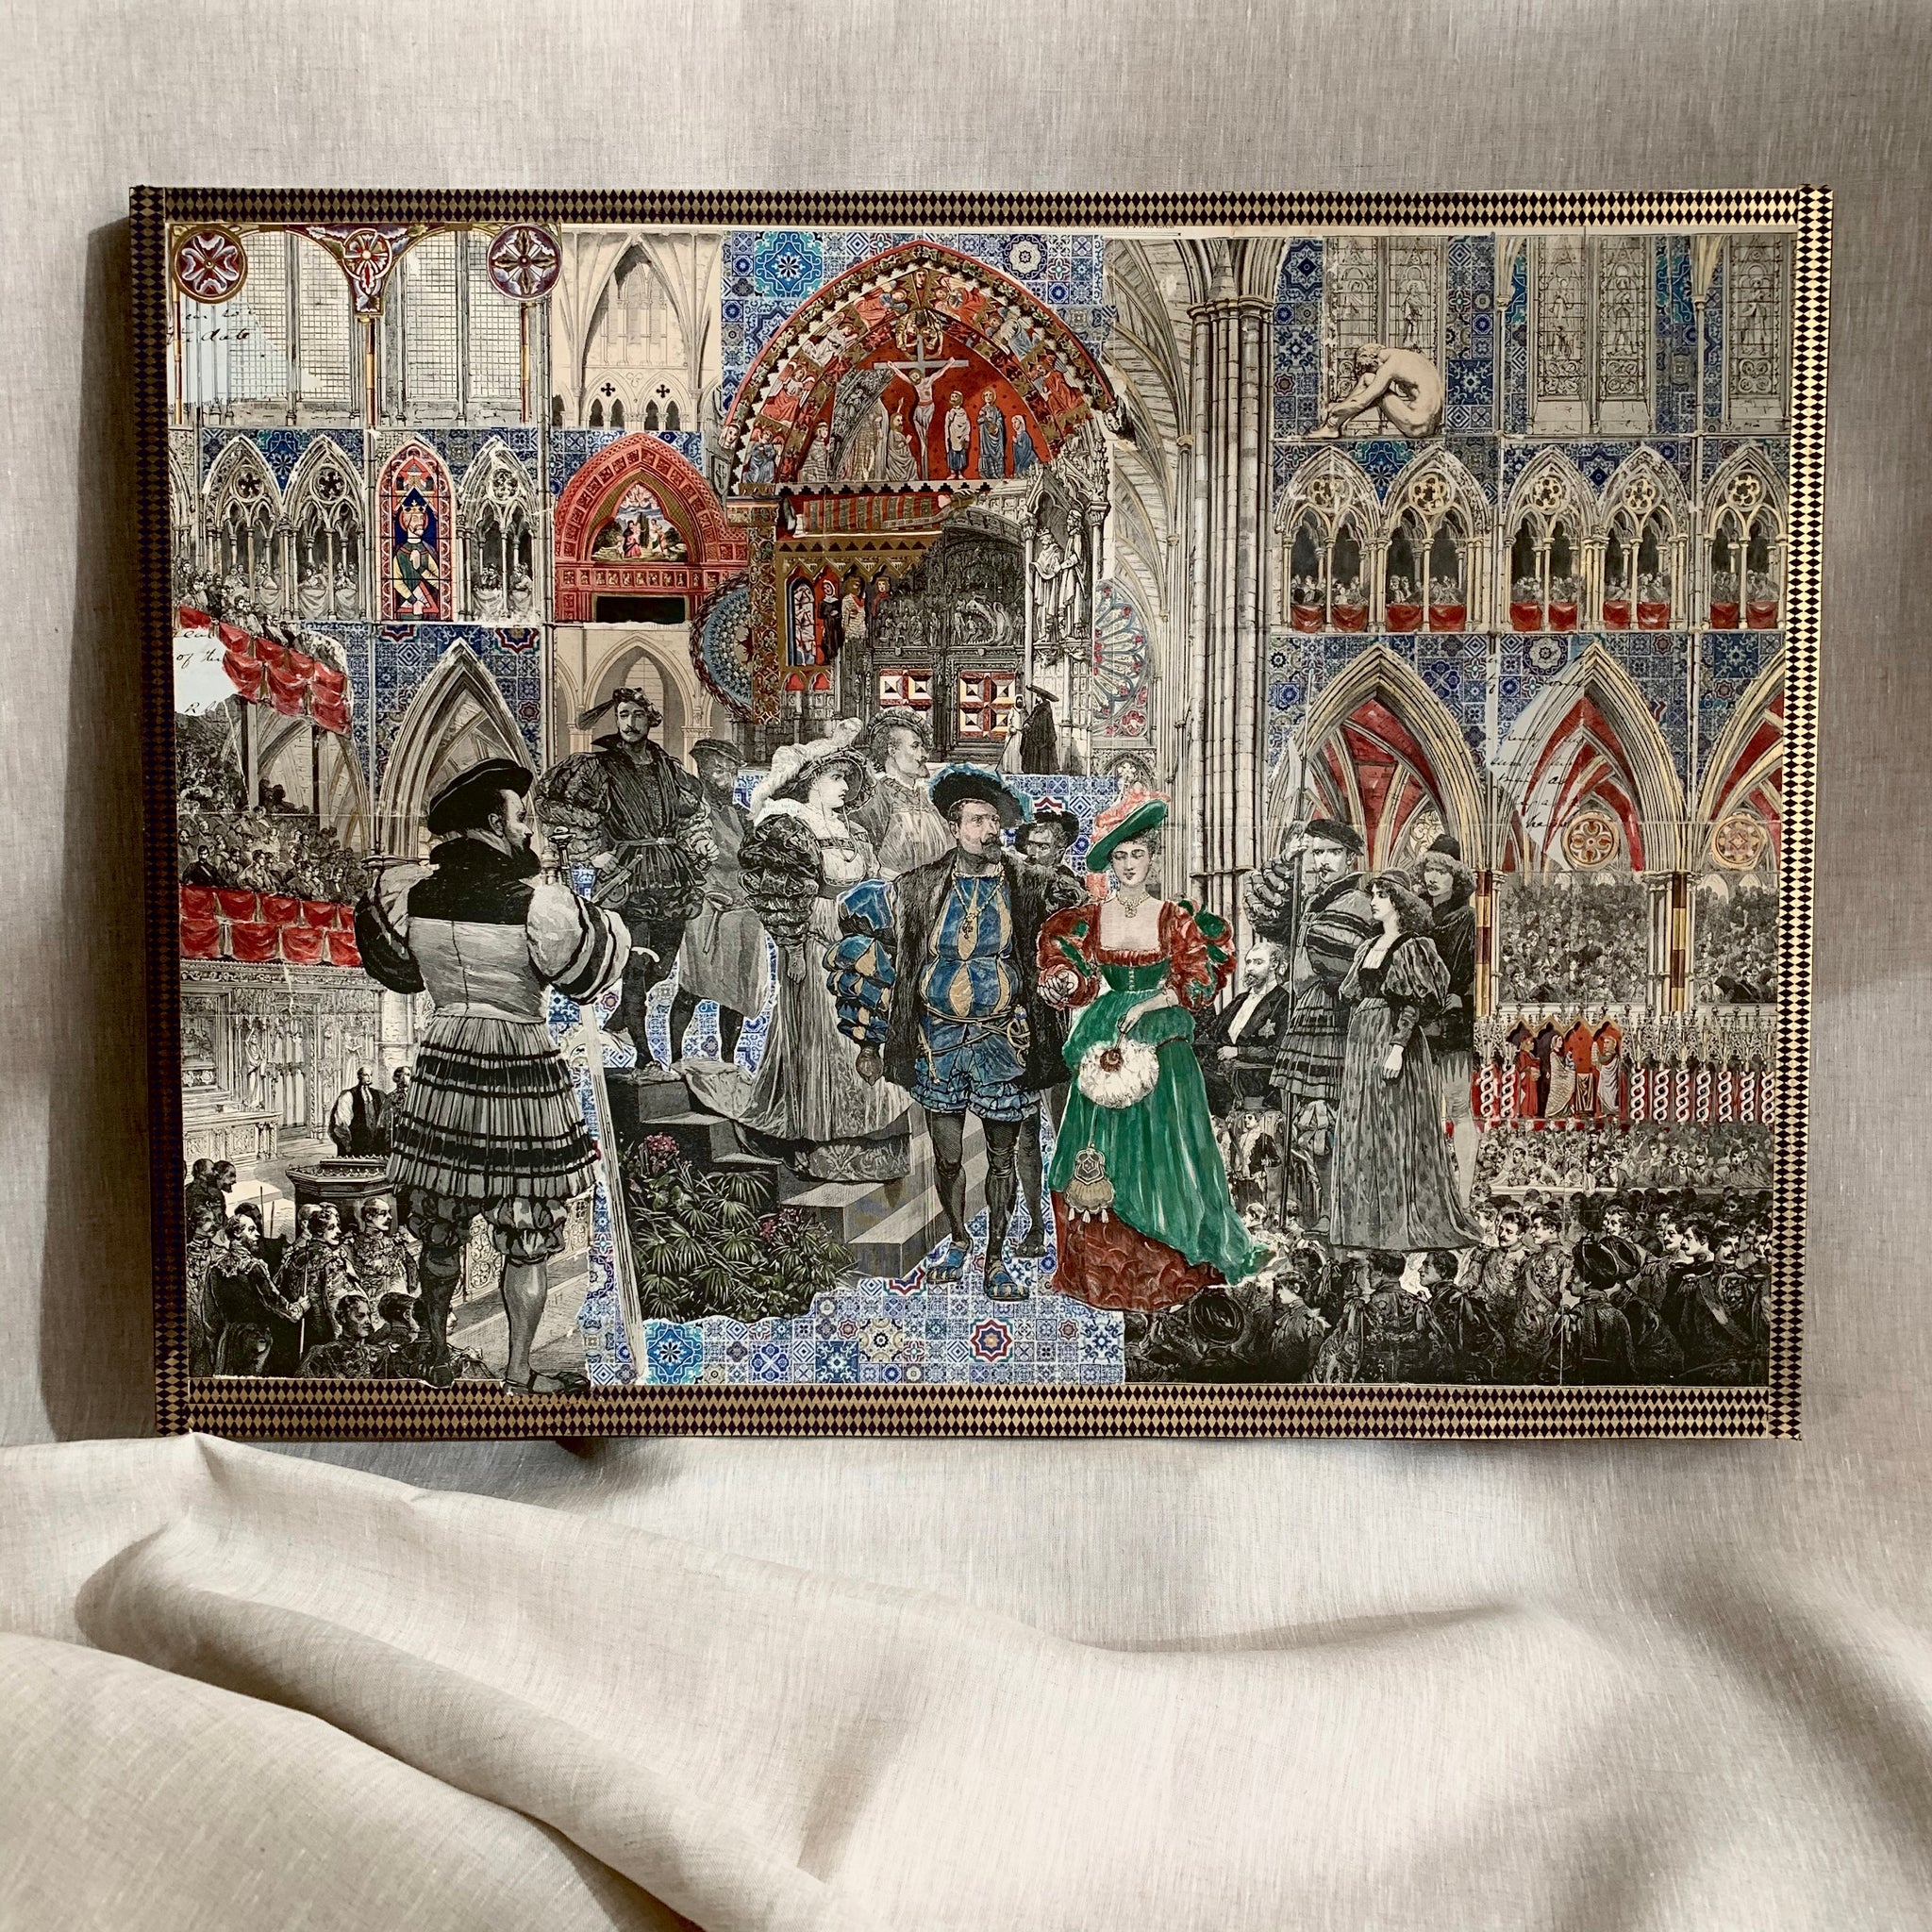 A Wedding in England. Large Original Mixed Media Art Collage on Wood Panel